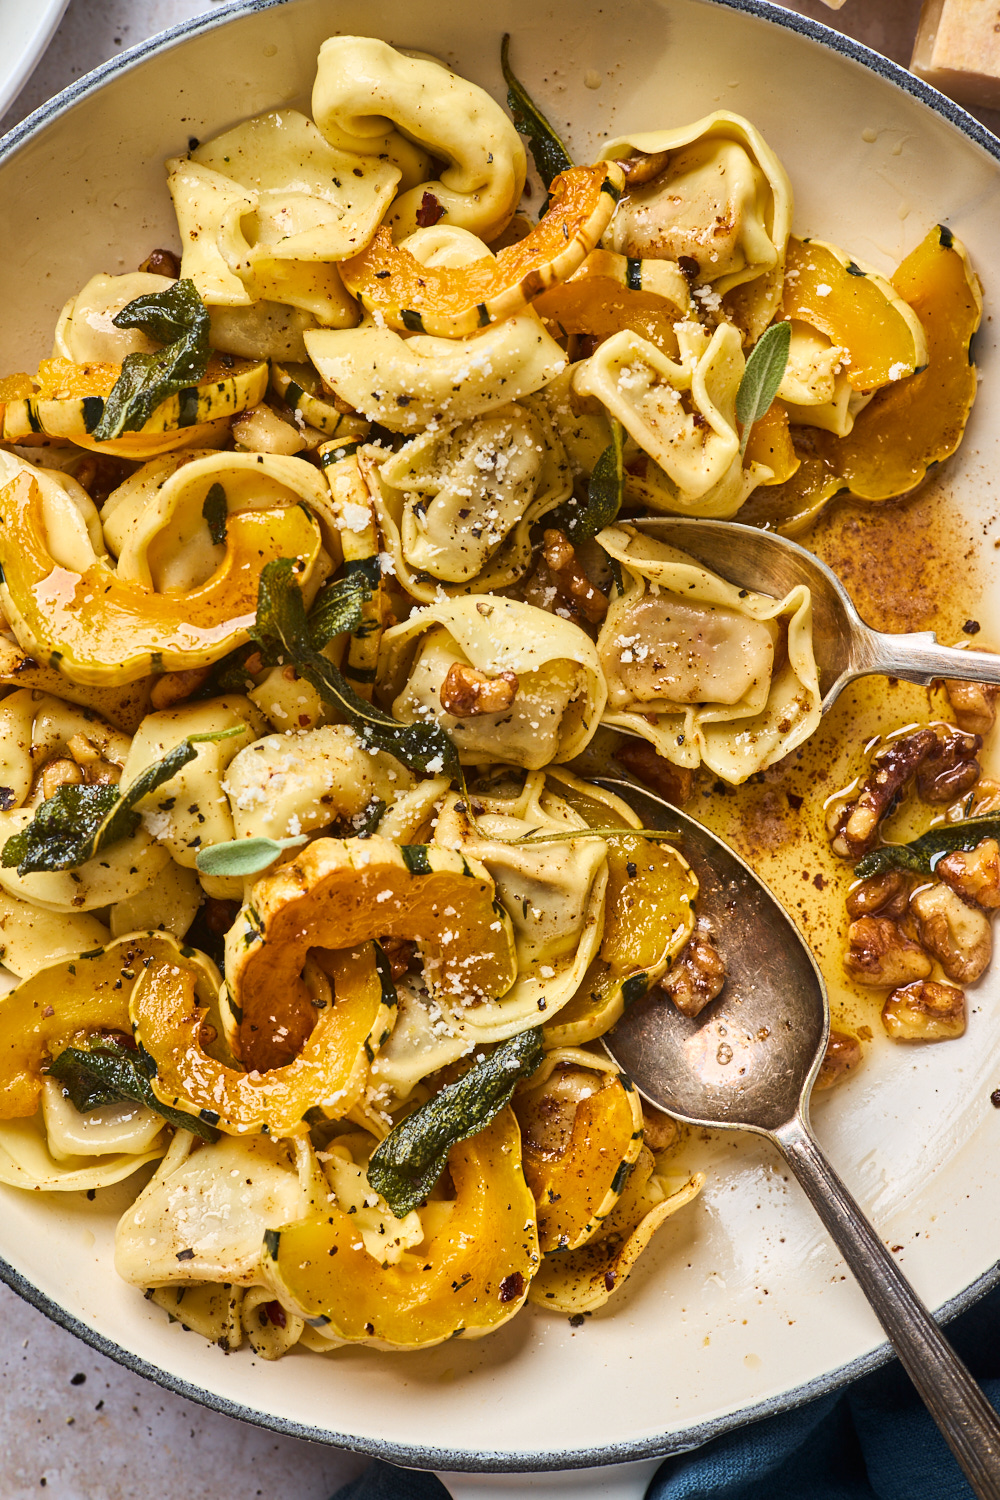 Brown Butter Tortellini With Roasted Squash